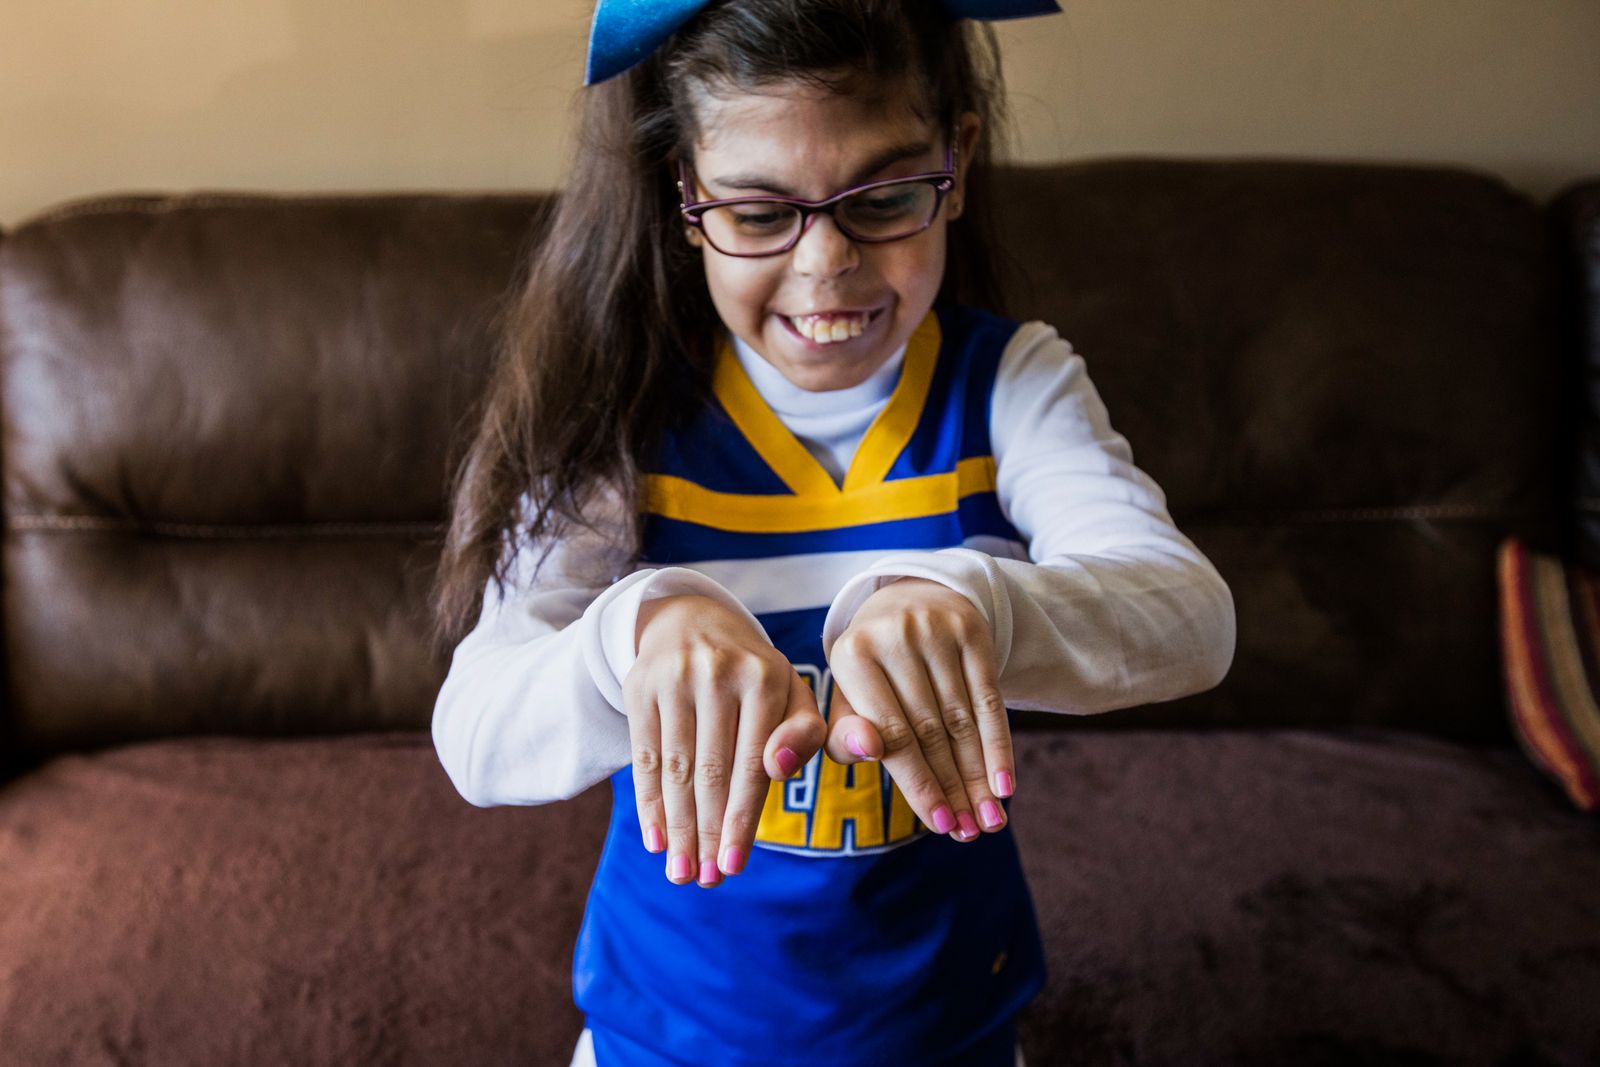 © Karen Haberberg - THOUGH GIANNA HAS HAD 26 SURGERIES, SHE IS STILL ABLE TO PARTICIPATE IN HER TOWN’S GENERAL CHEERING SQUAD.